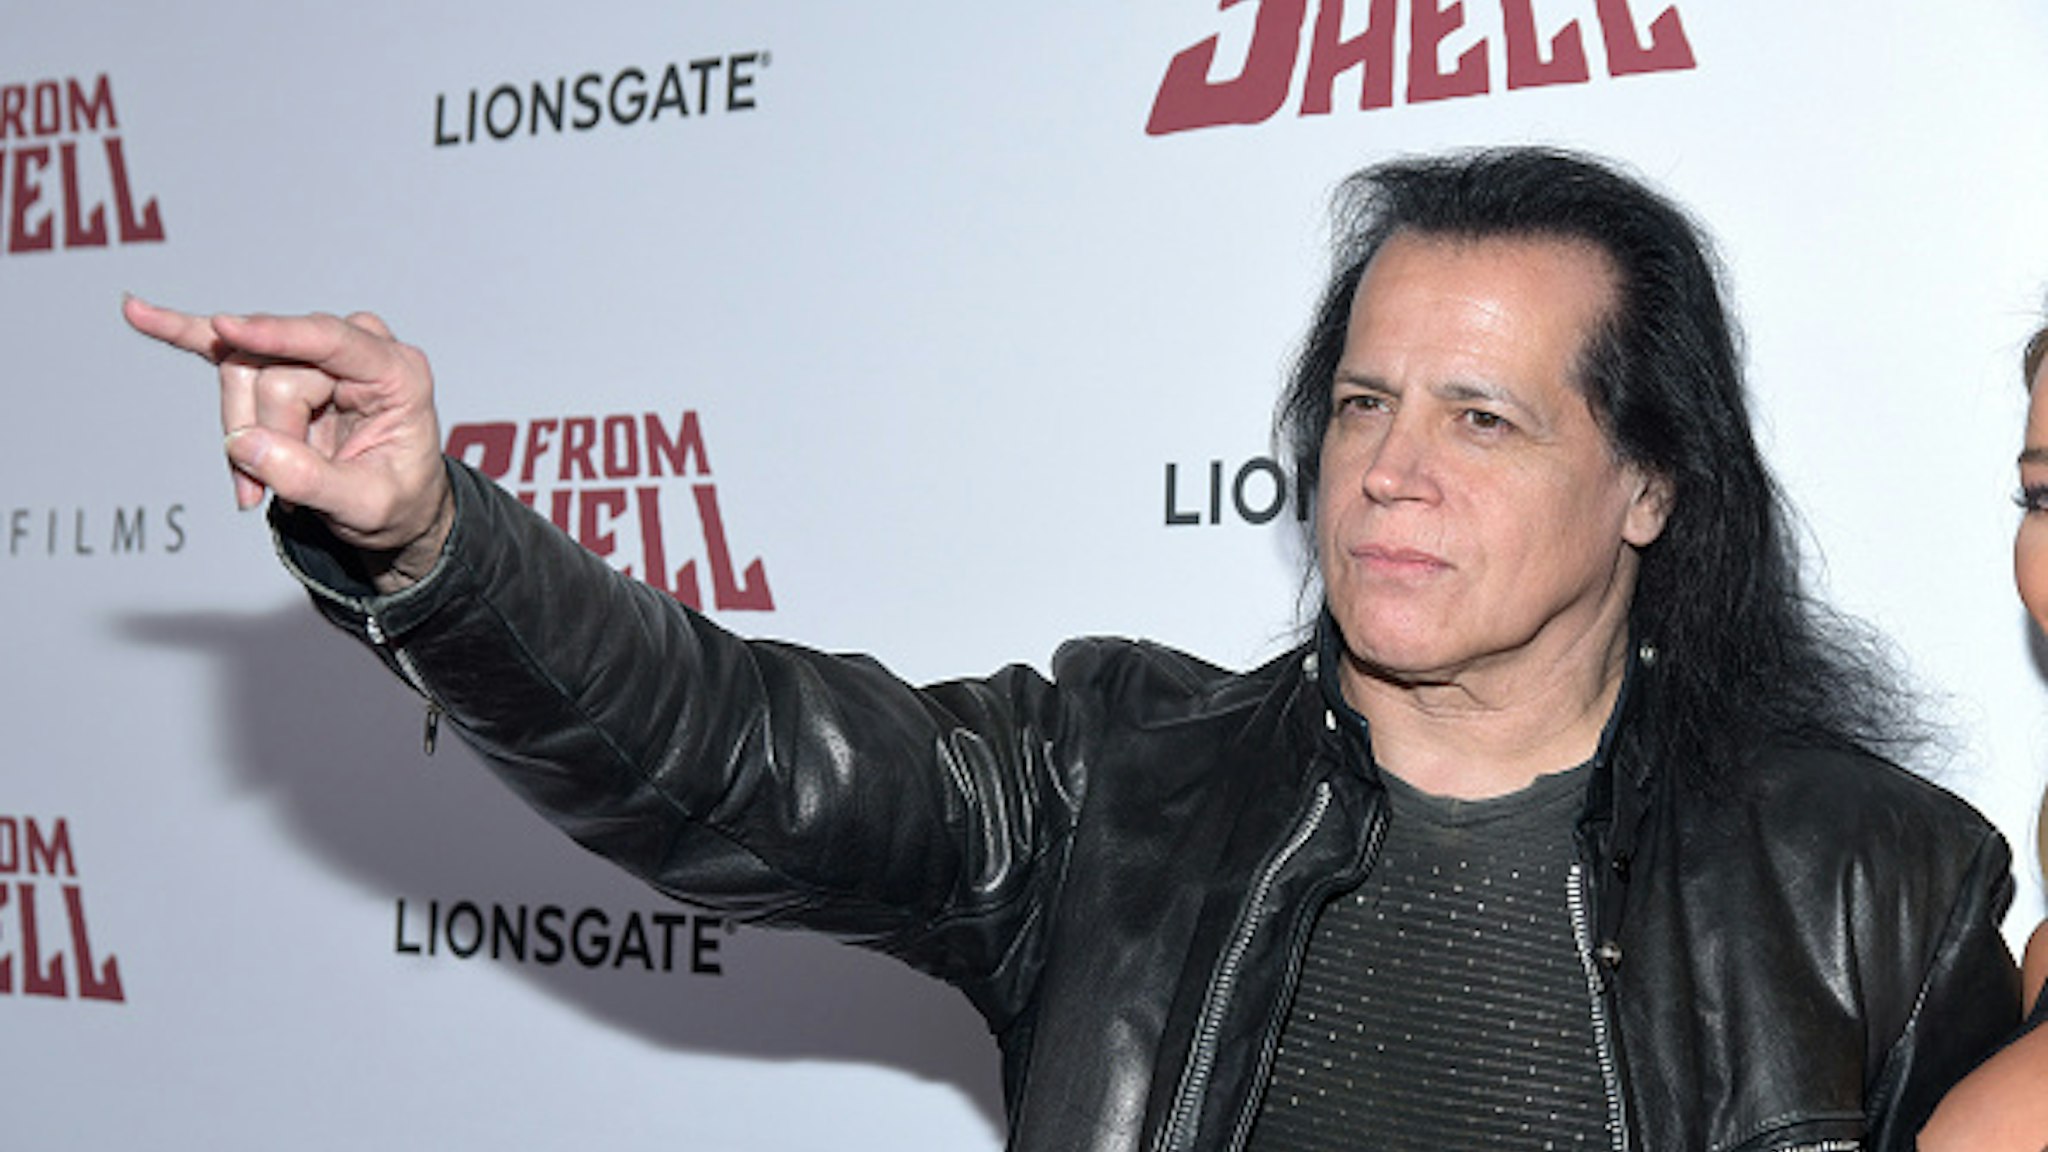 LOS ANGELES, CALIFORNIA - SEPTEMBER 16: Musician Glenn Danzig of The Misfits attends a special screening of Lionsgate's "3 From Hell" at the Vista Theatre on September 16, 2019 in Los Angeles, California.